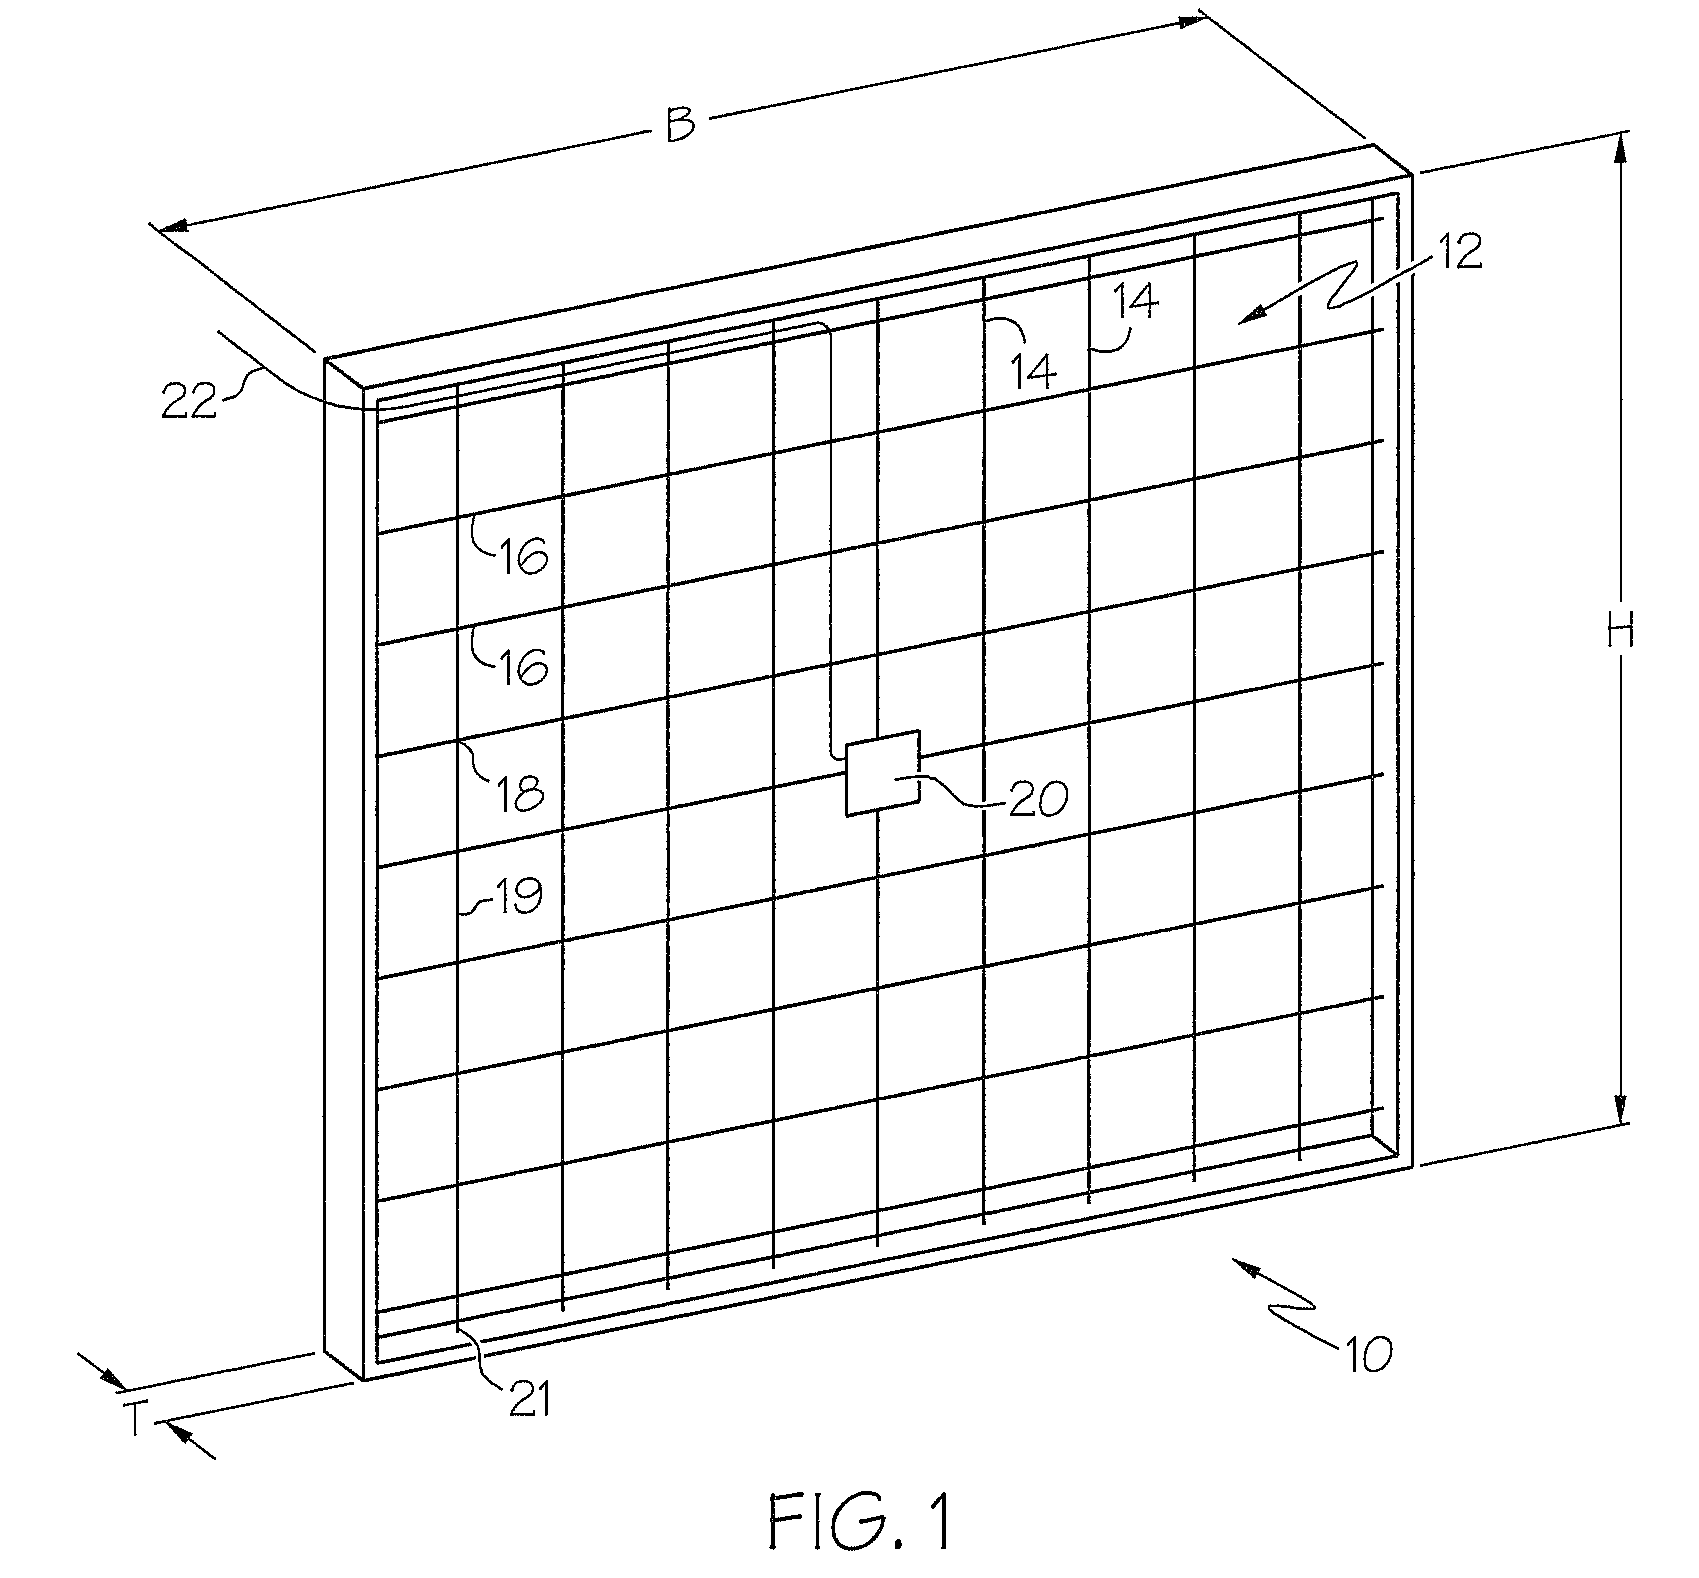 Industrial truck with at least one antenna for sending and receiving data